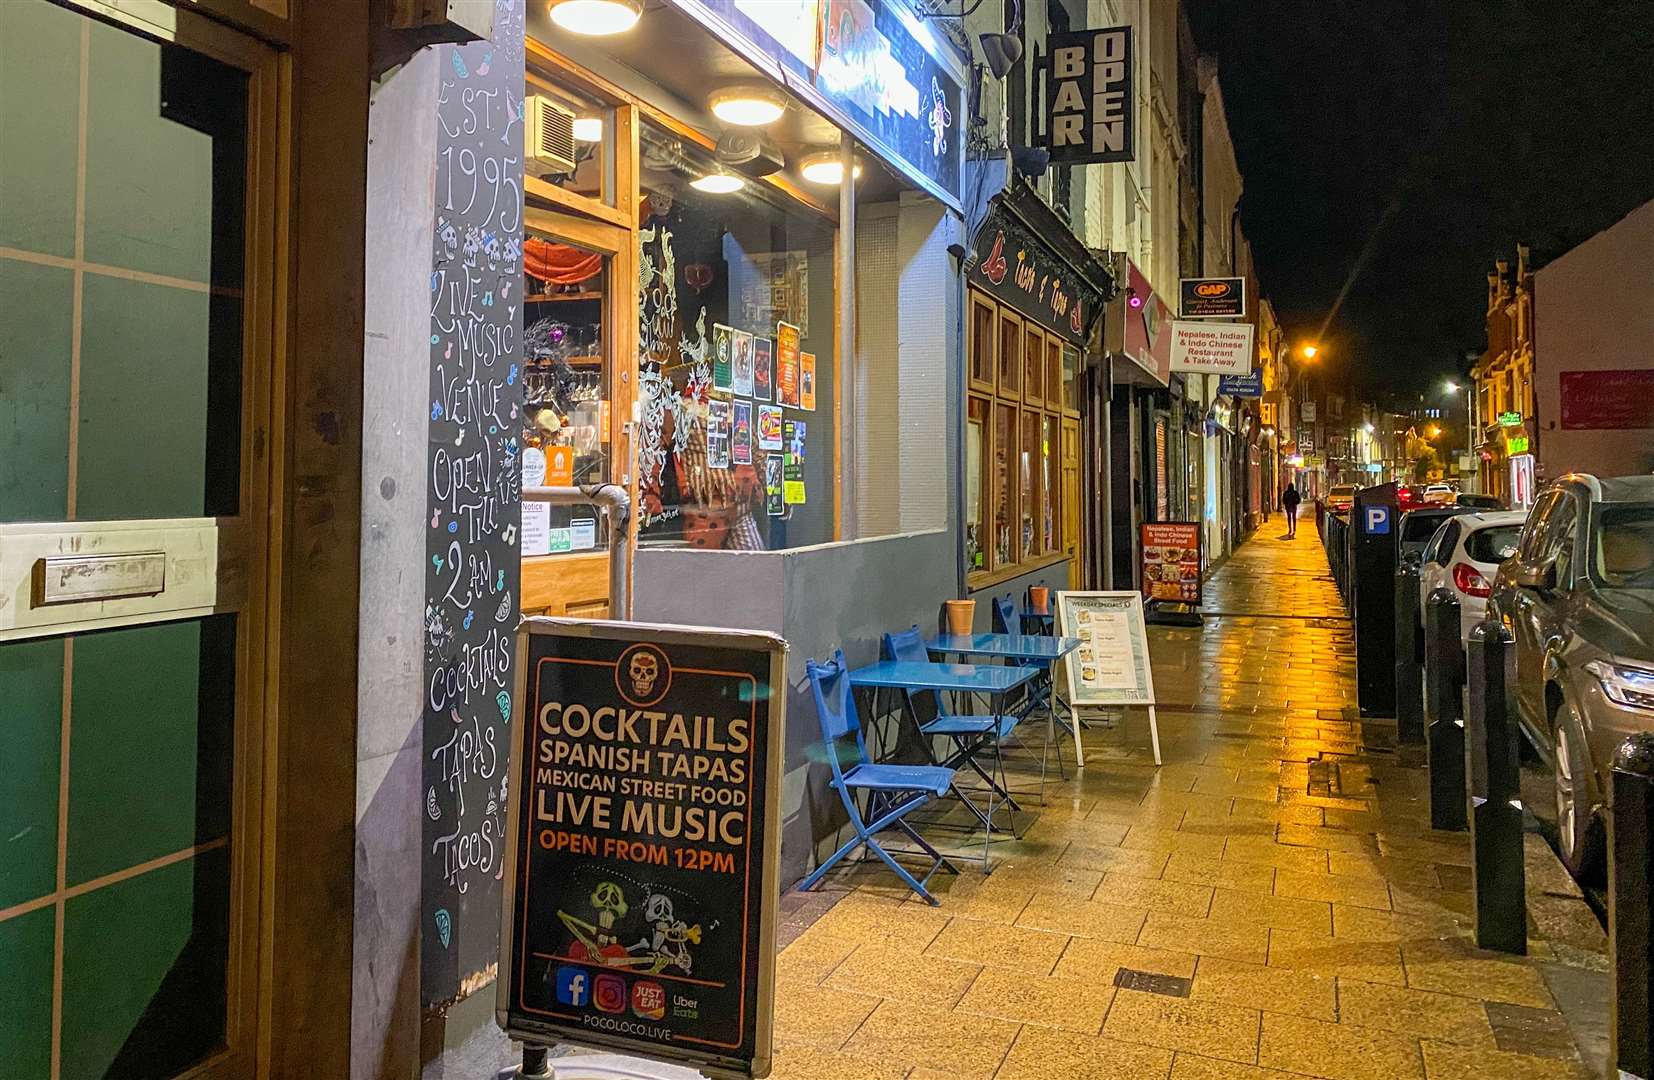 While the bar and restaurant might not get much footfall where it is, it’s definitely worth a visit – especially on tapas night